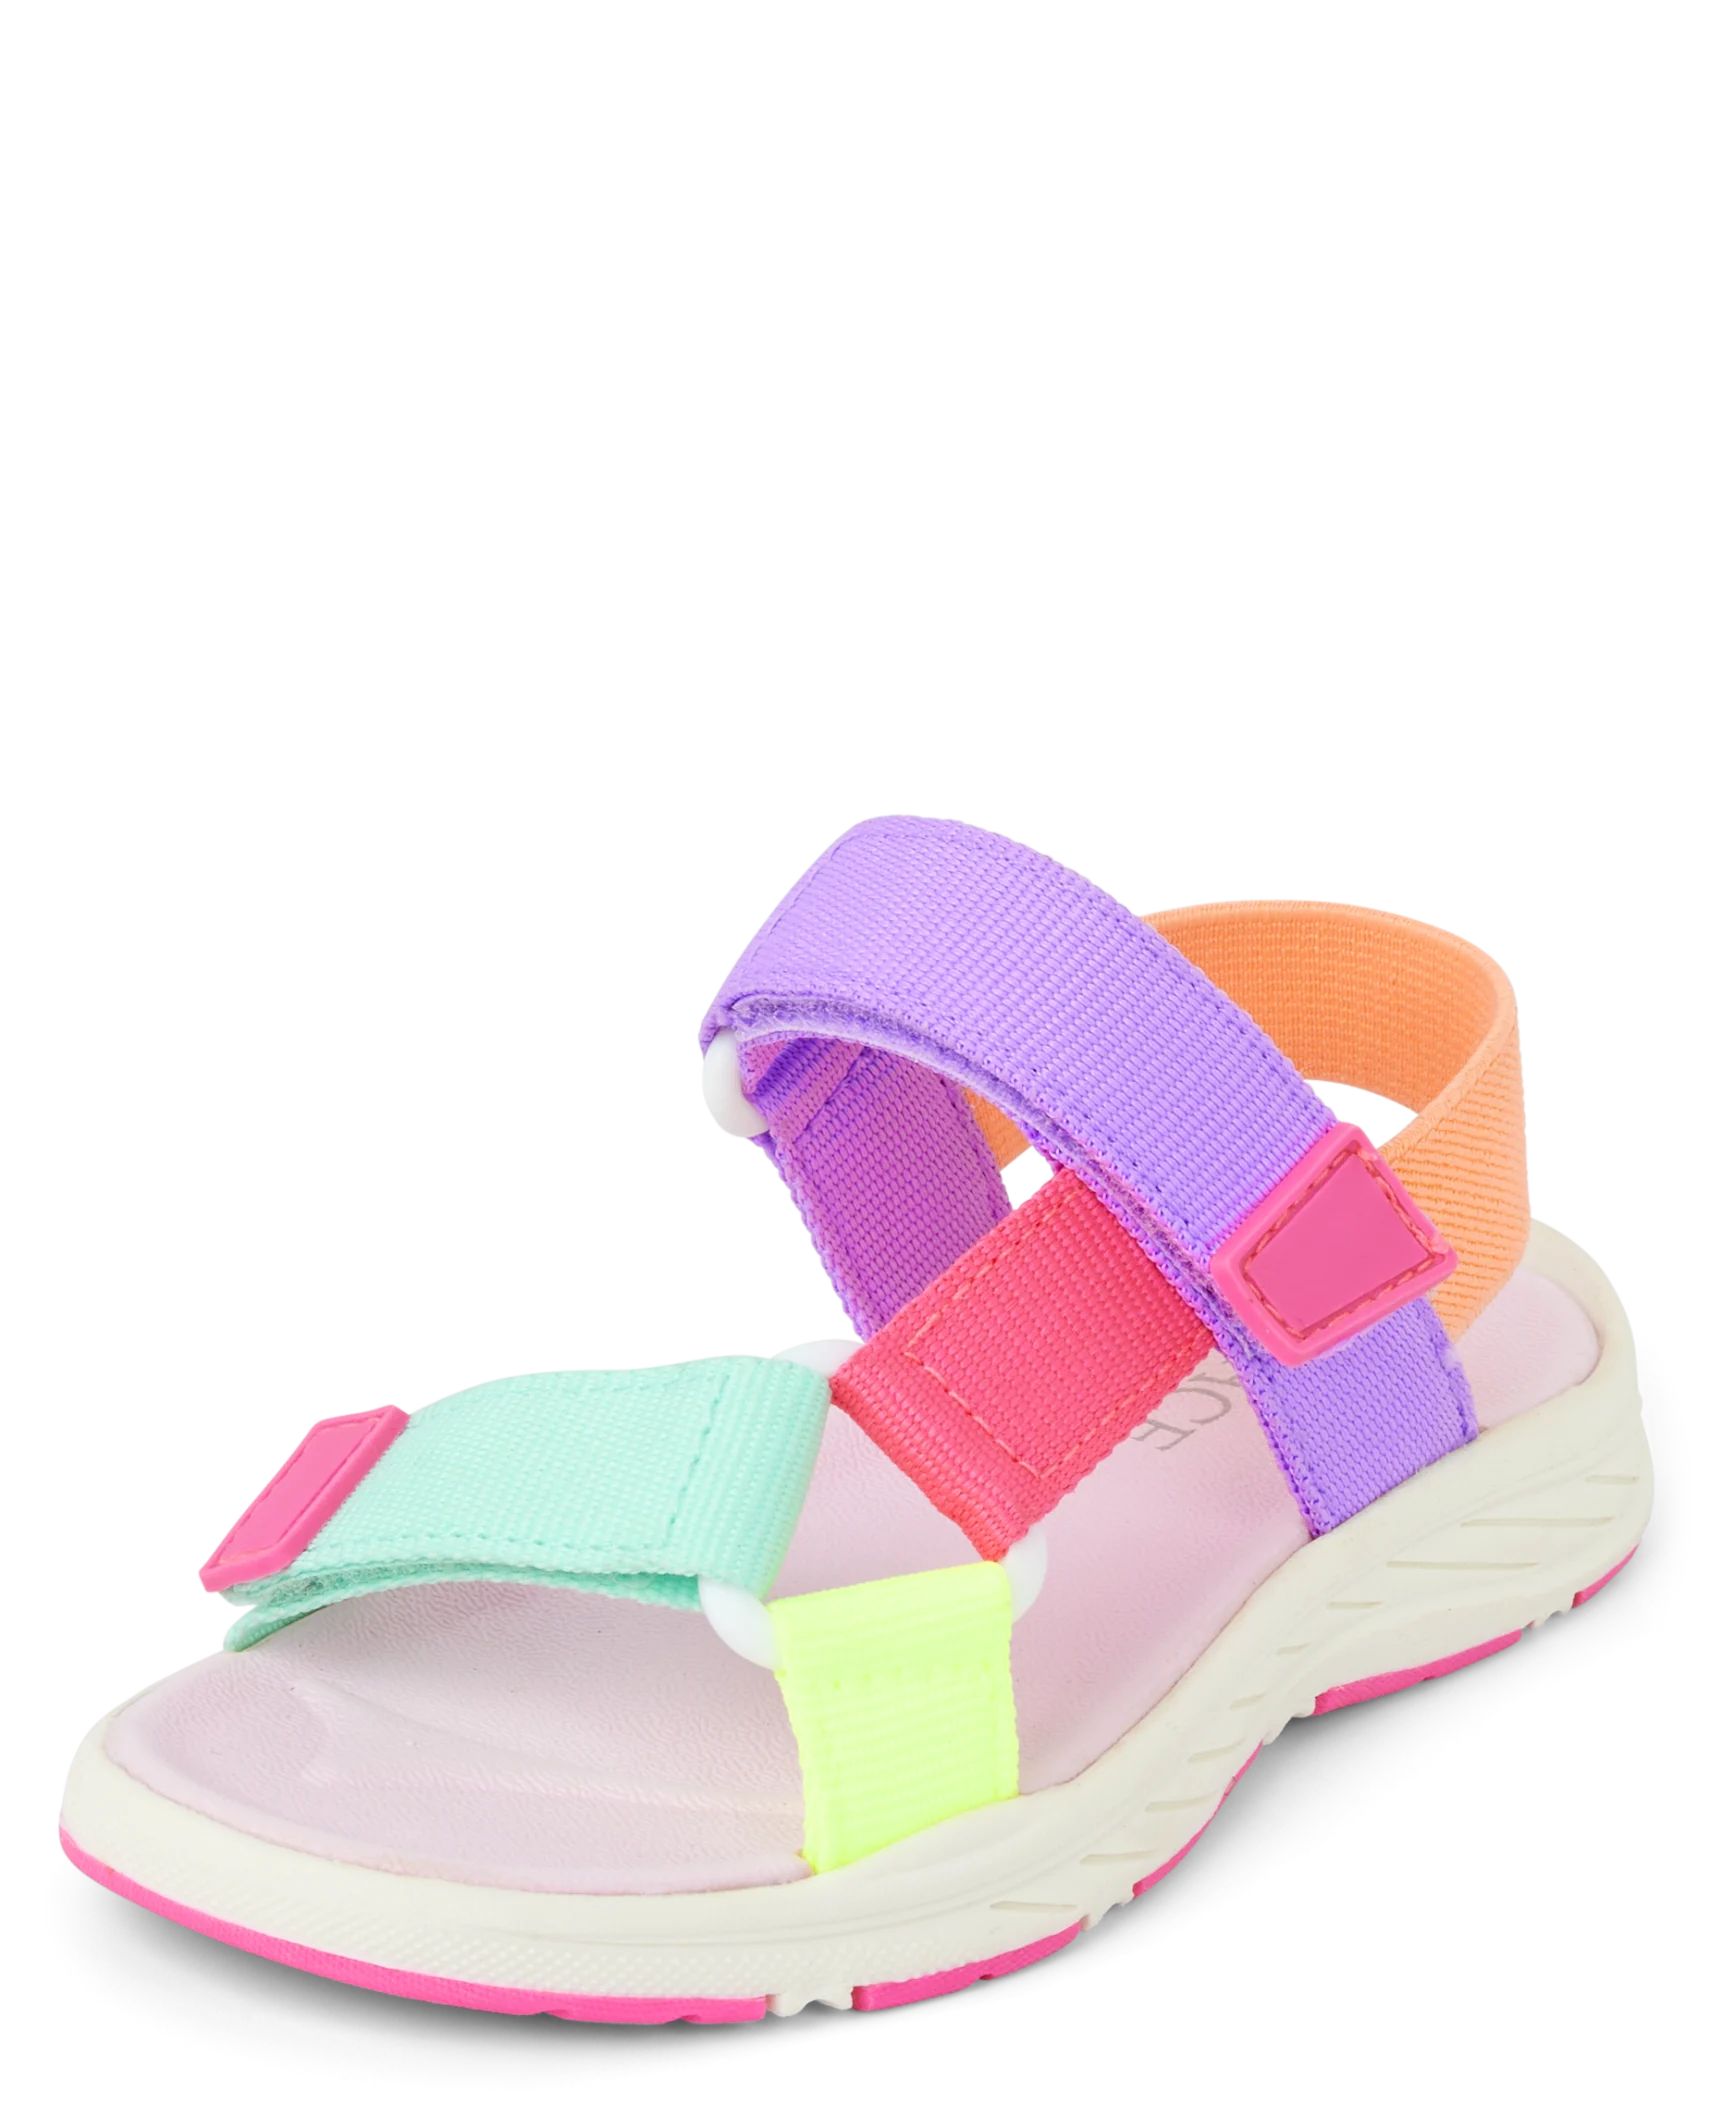 Toddler Girls Colorblock Webbed Sandals | The Children's Place  - MULTI COLOR 1 | The Children's Place